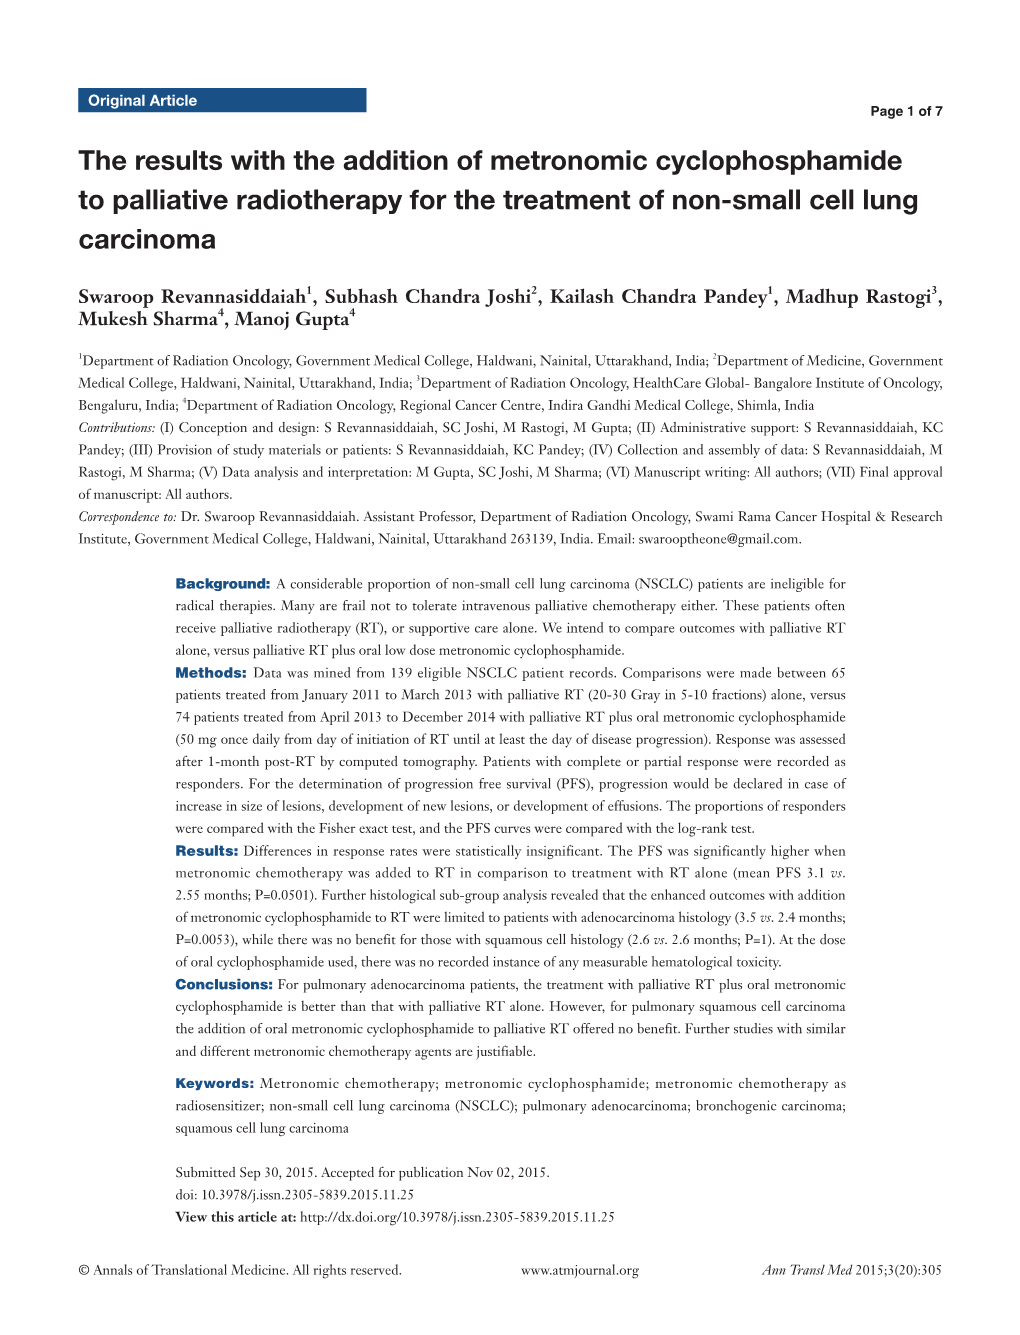 The Results with the Addition of Metronomic Cyclophosphamide to Palliative Radiotherapy for the Treatment of Non-Small Cell Lung Carcinoma